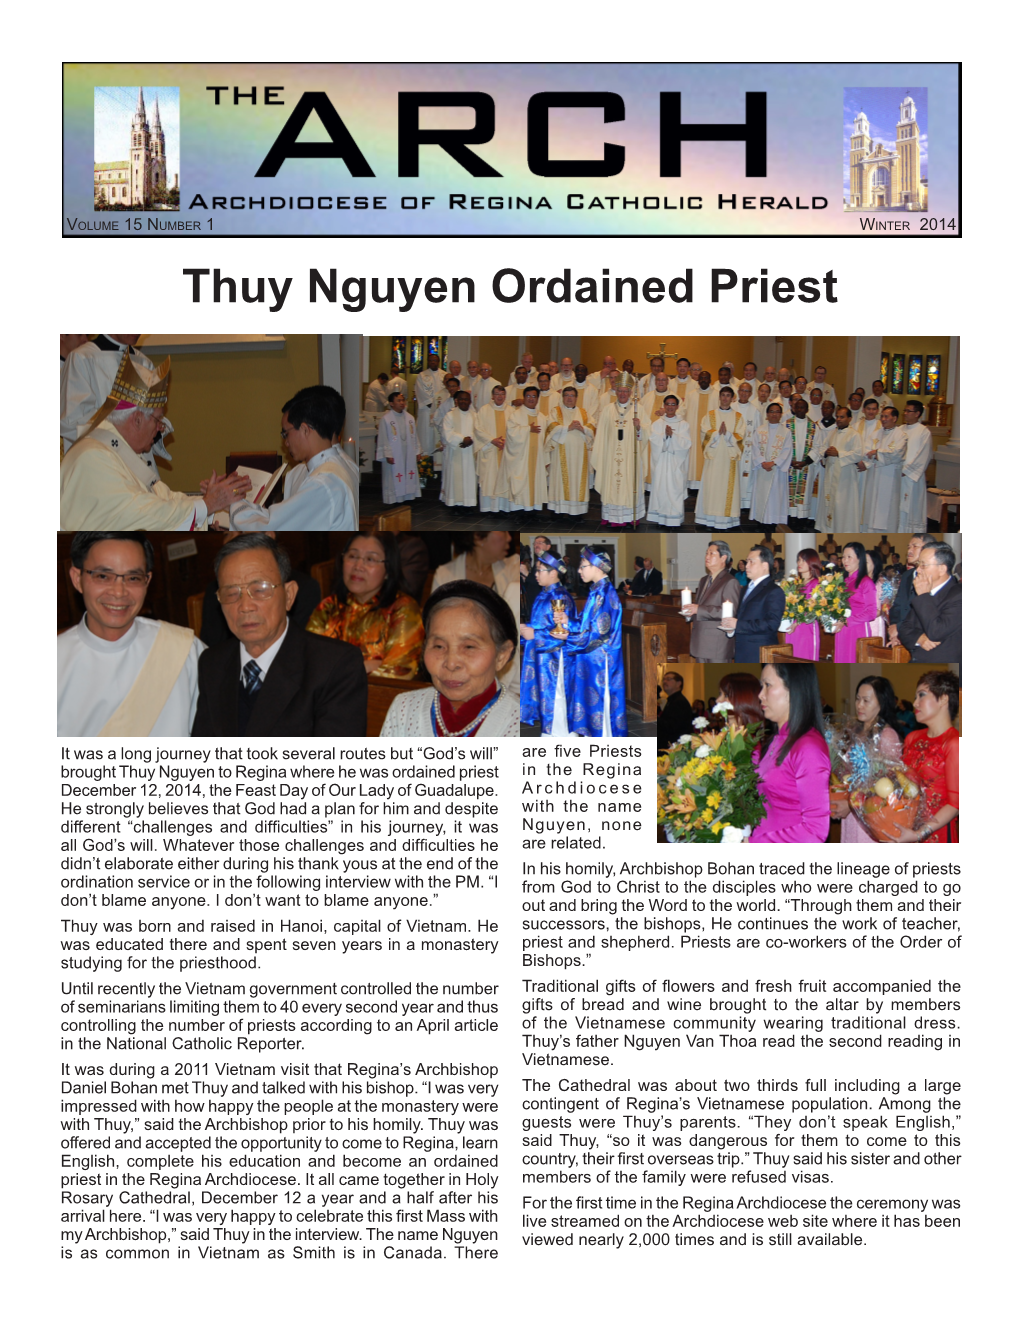 Thuy Nguyen Ordained Priest